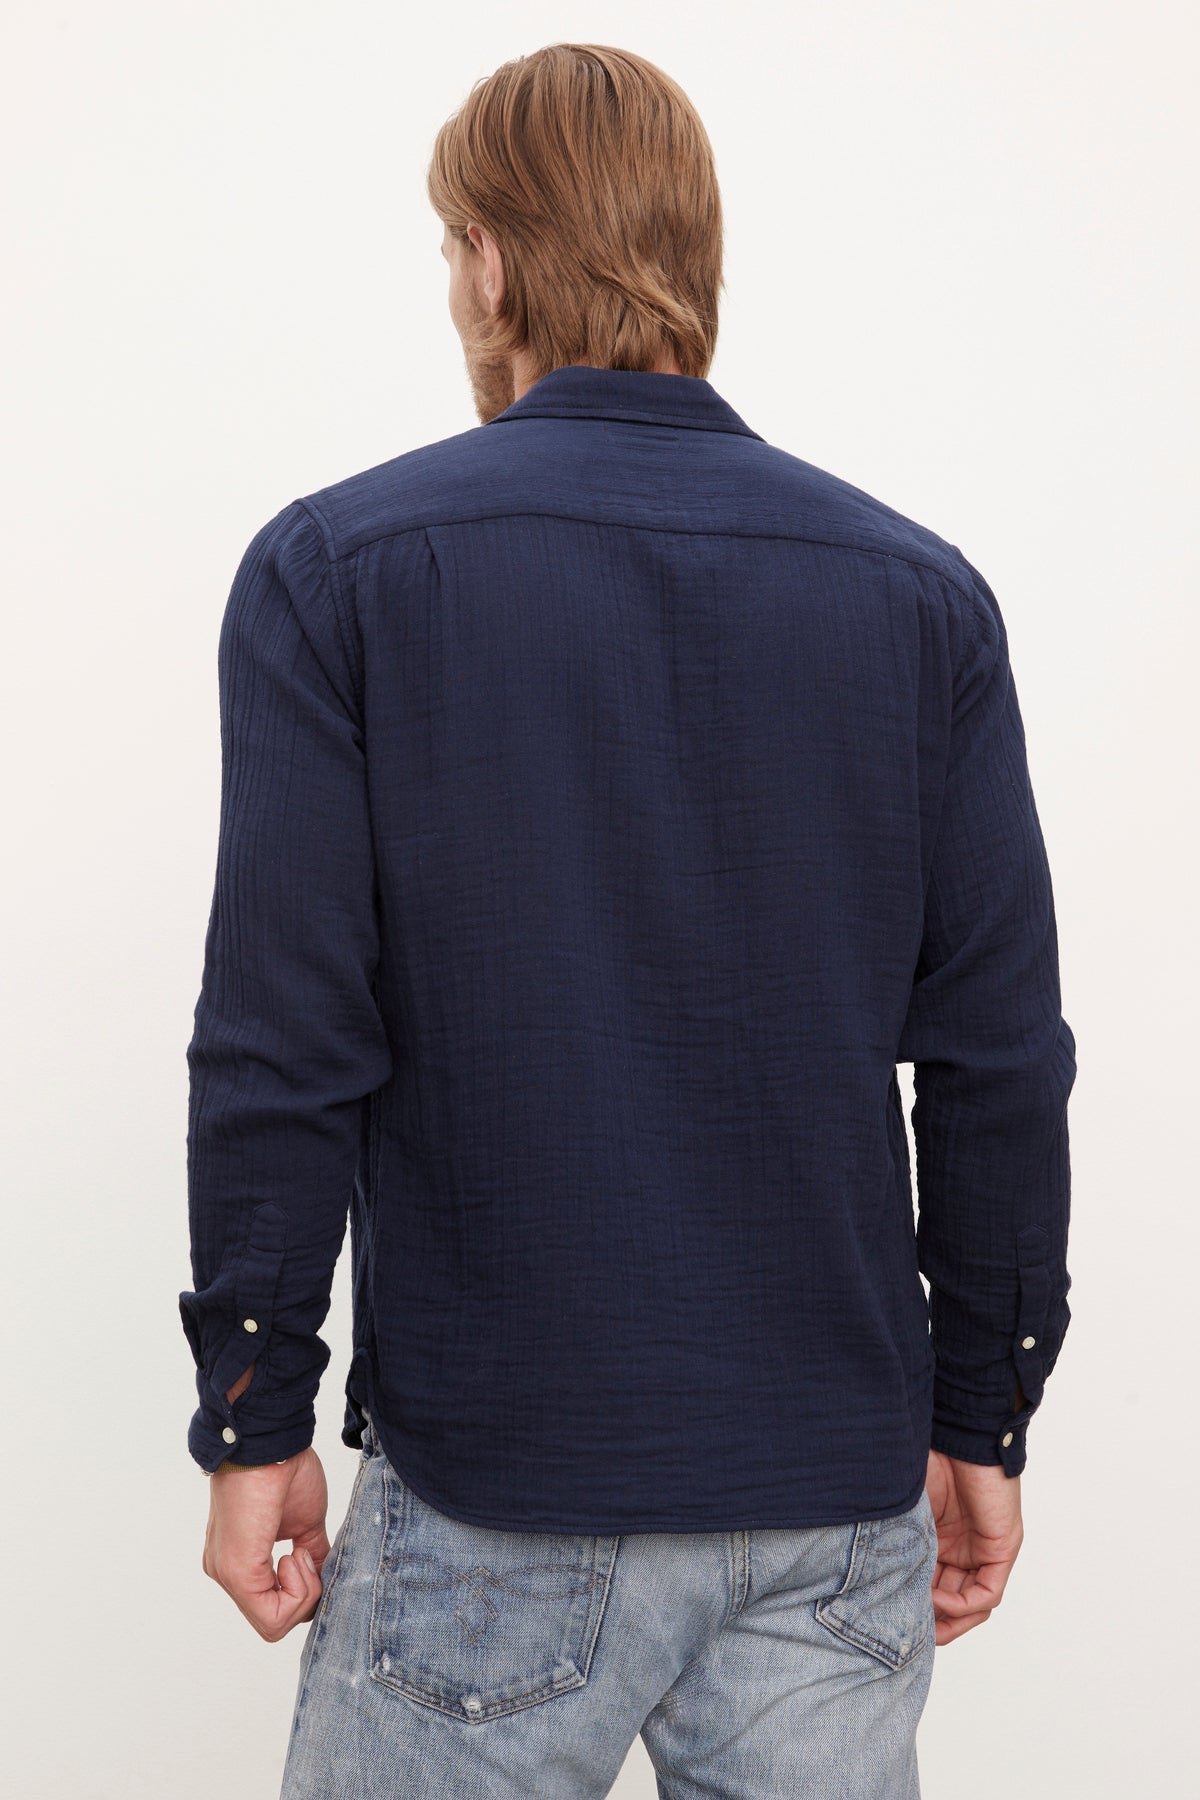 A man viewed from the back wearing a Velvet by Graham & Spencer ELTON COTTON GAUZE BUTTON-UP SHIRT with double button cuffs and faded blue jeans.-36009394995393